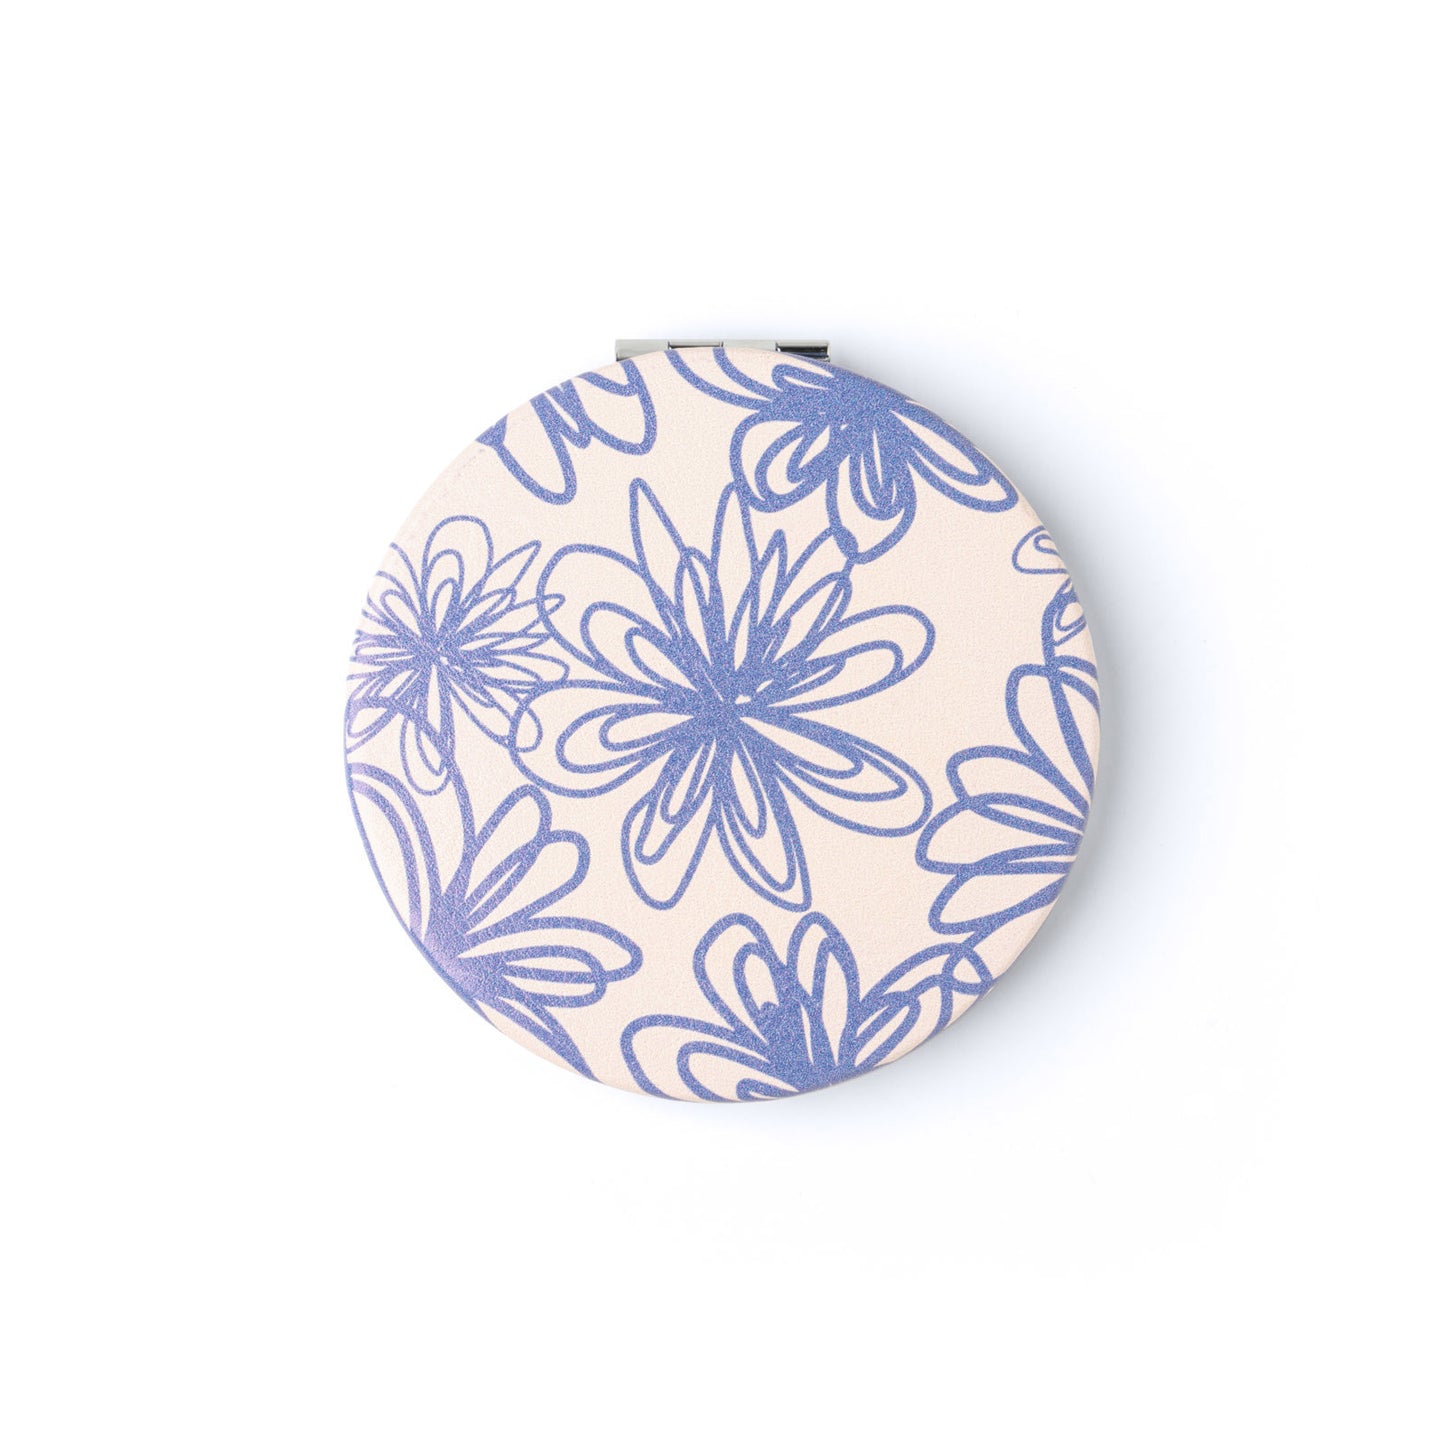 compact mirror with blue floral design.